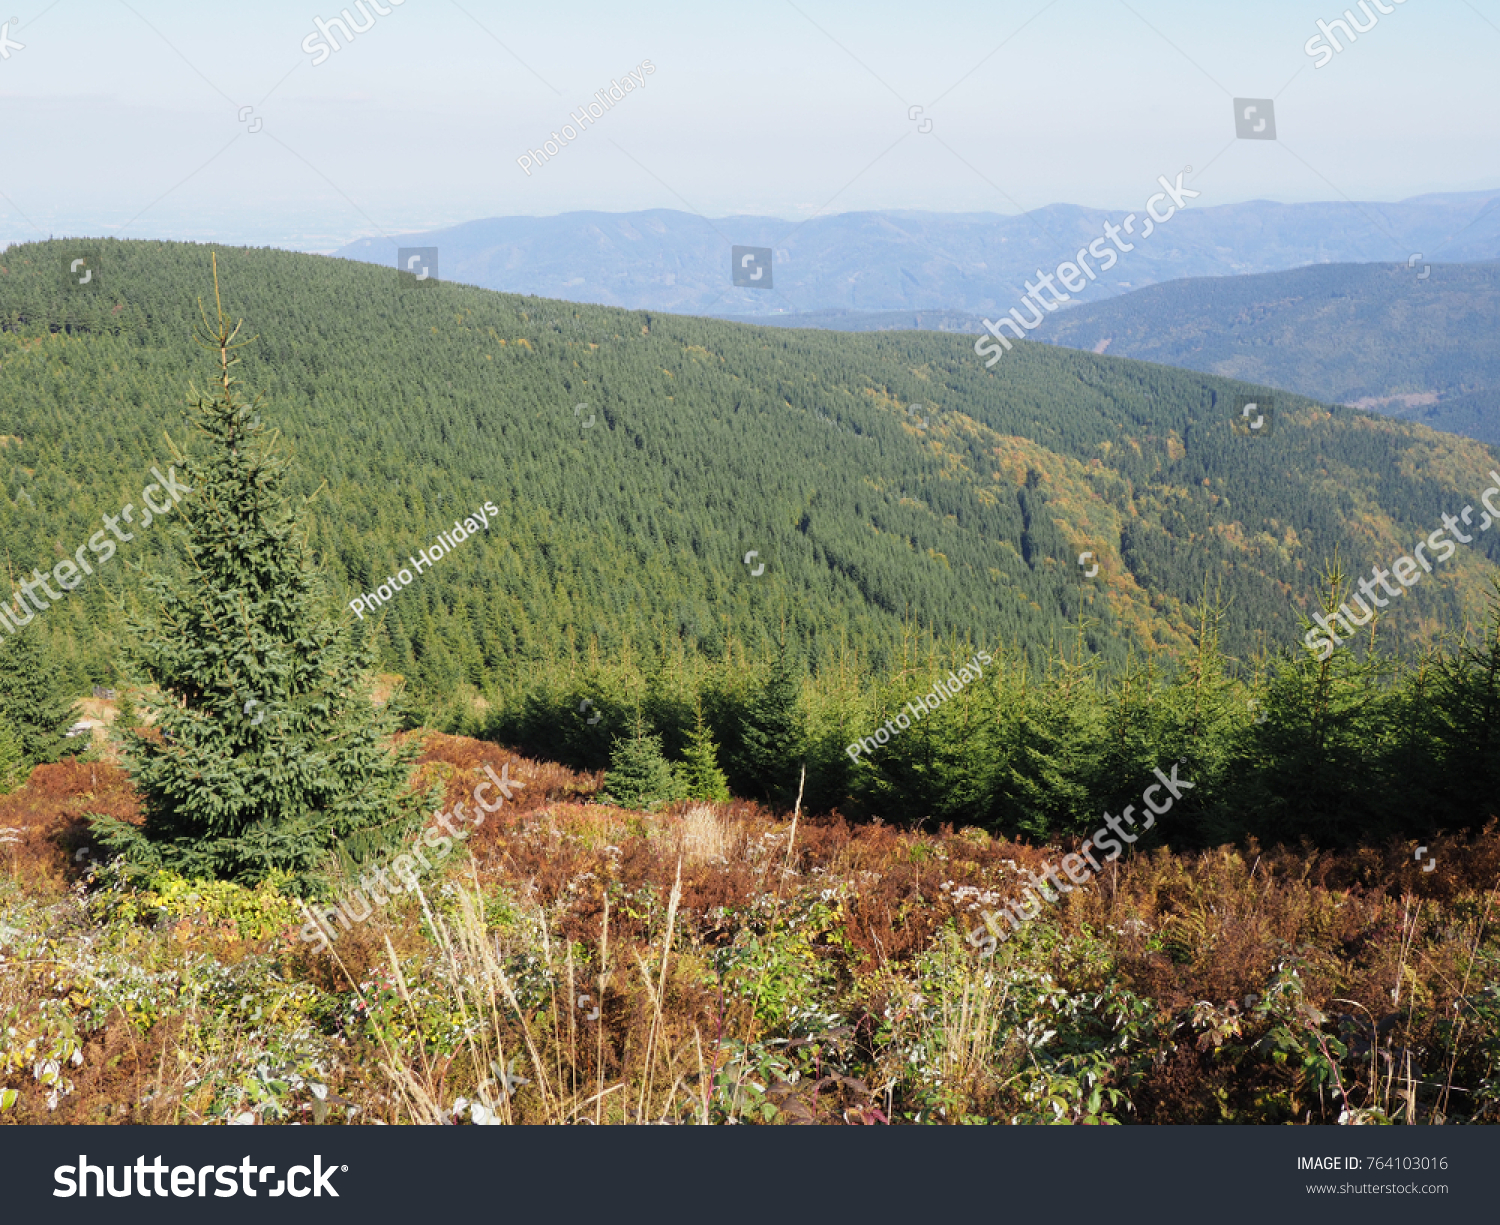 Scenic view on Moravian-Silesian Beskids mountains range landscape seen from Lysa Hora mount in Czech Republic with clear blue sky in 2017 warm sunny autumn day, Europe on September. #764103016